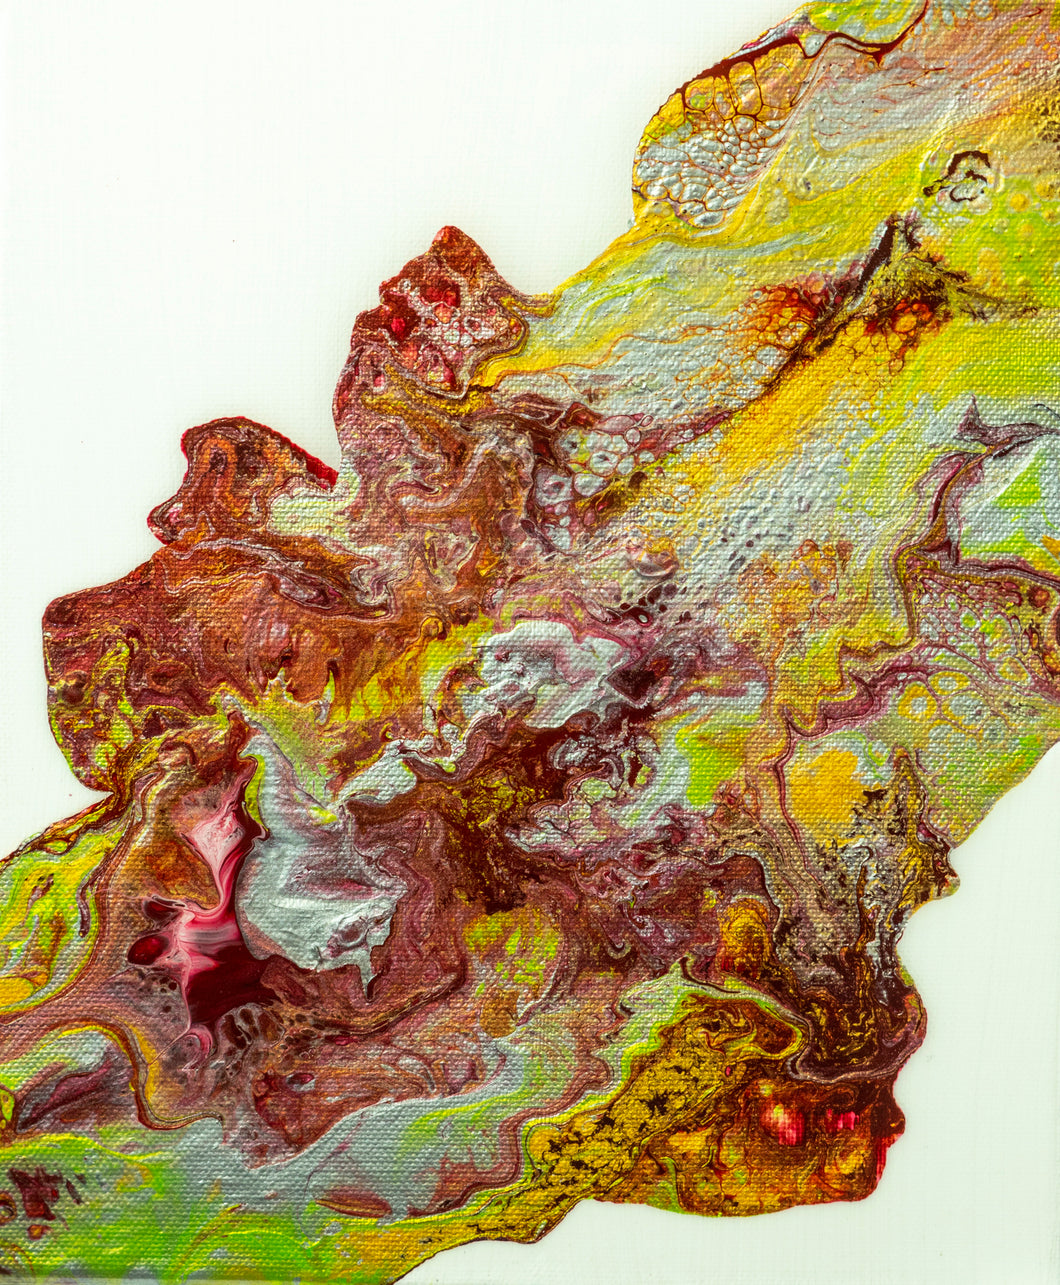 Fine Fluid Art exploring chromology and color psychology by Alessia Camoirano Bruges